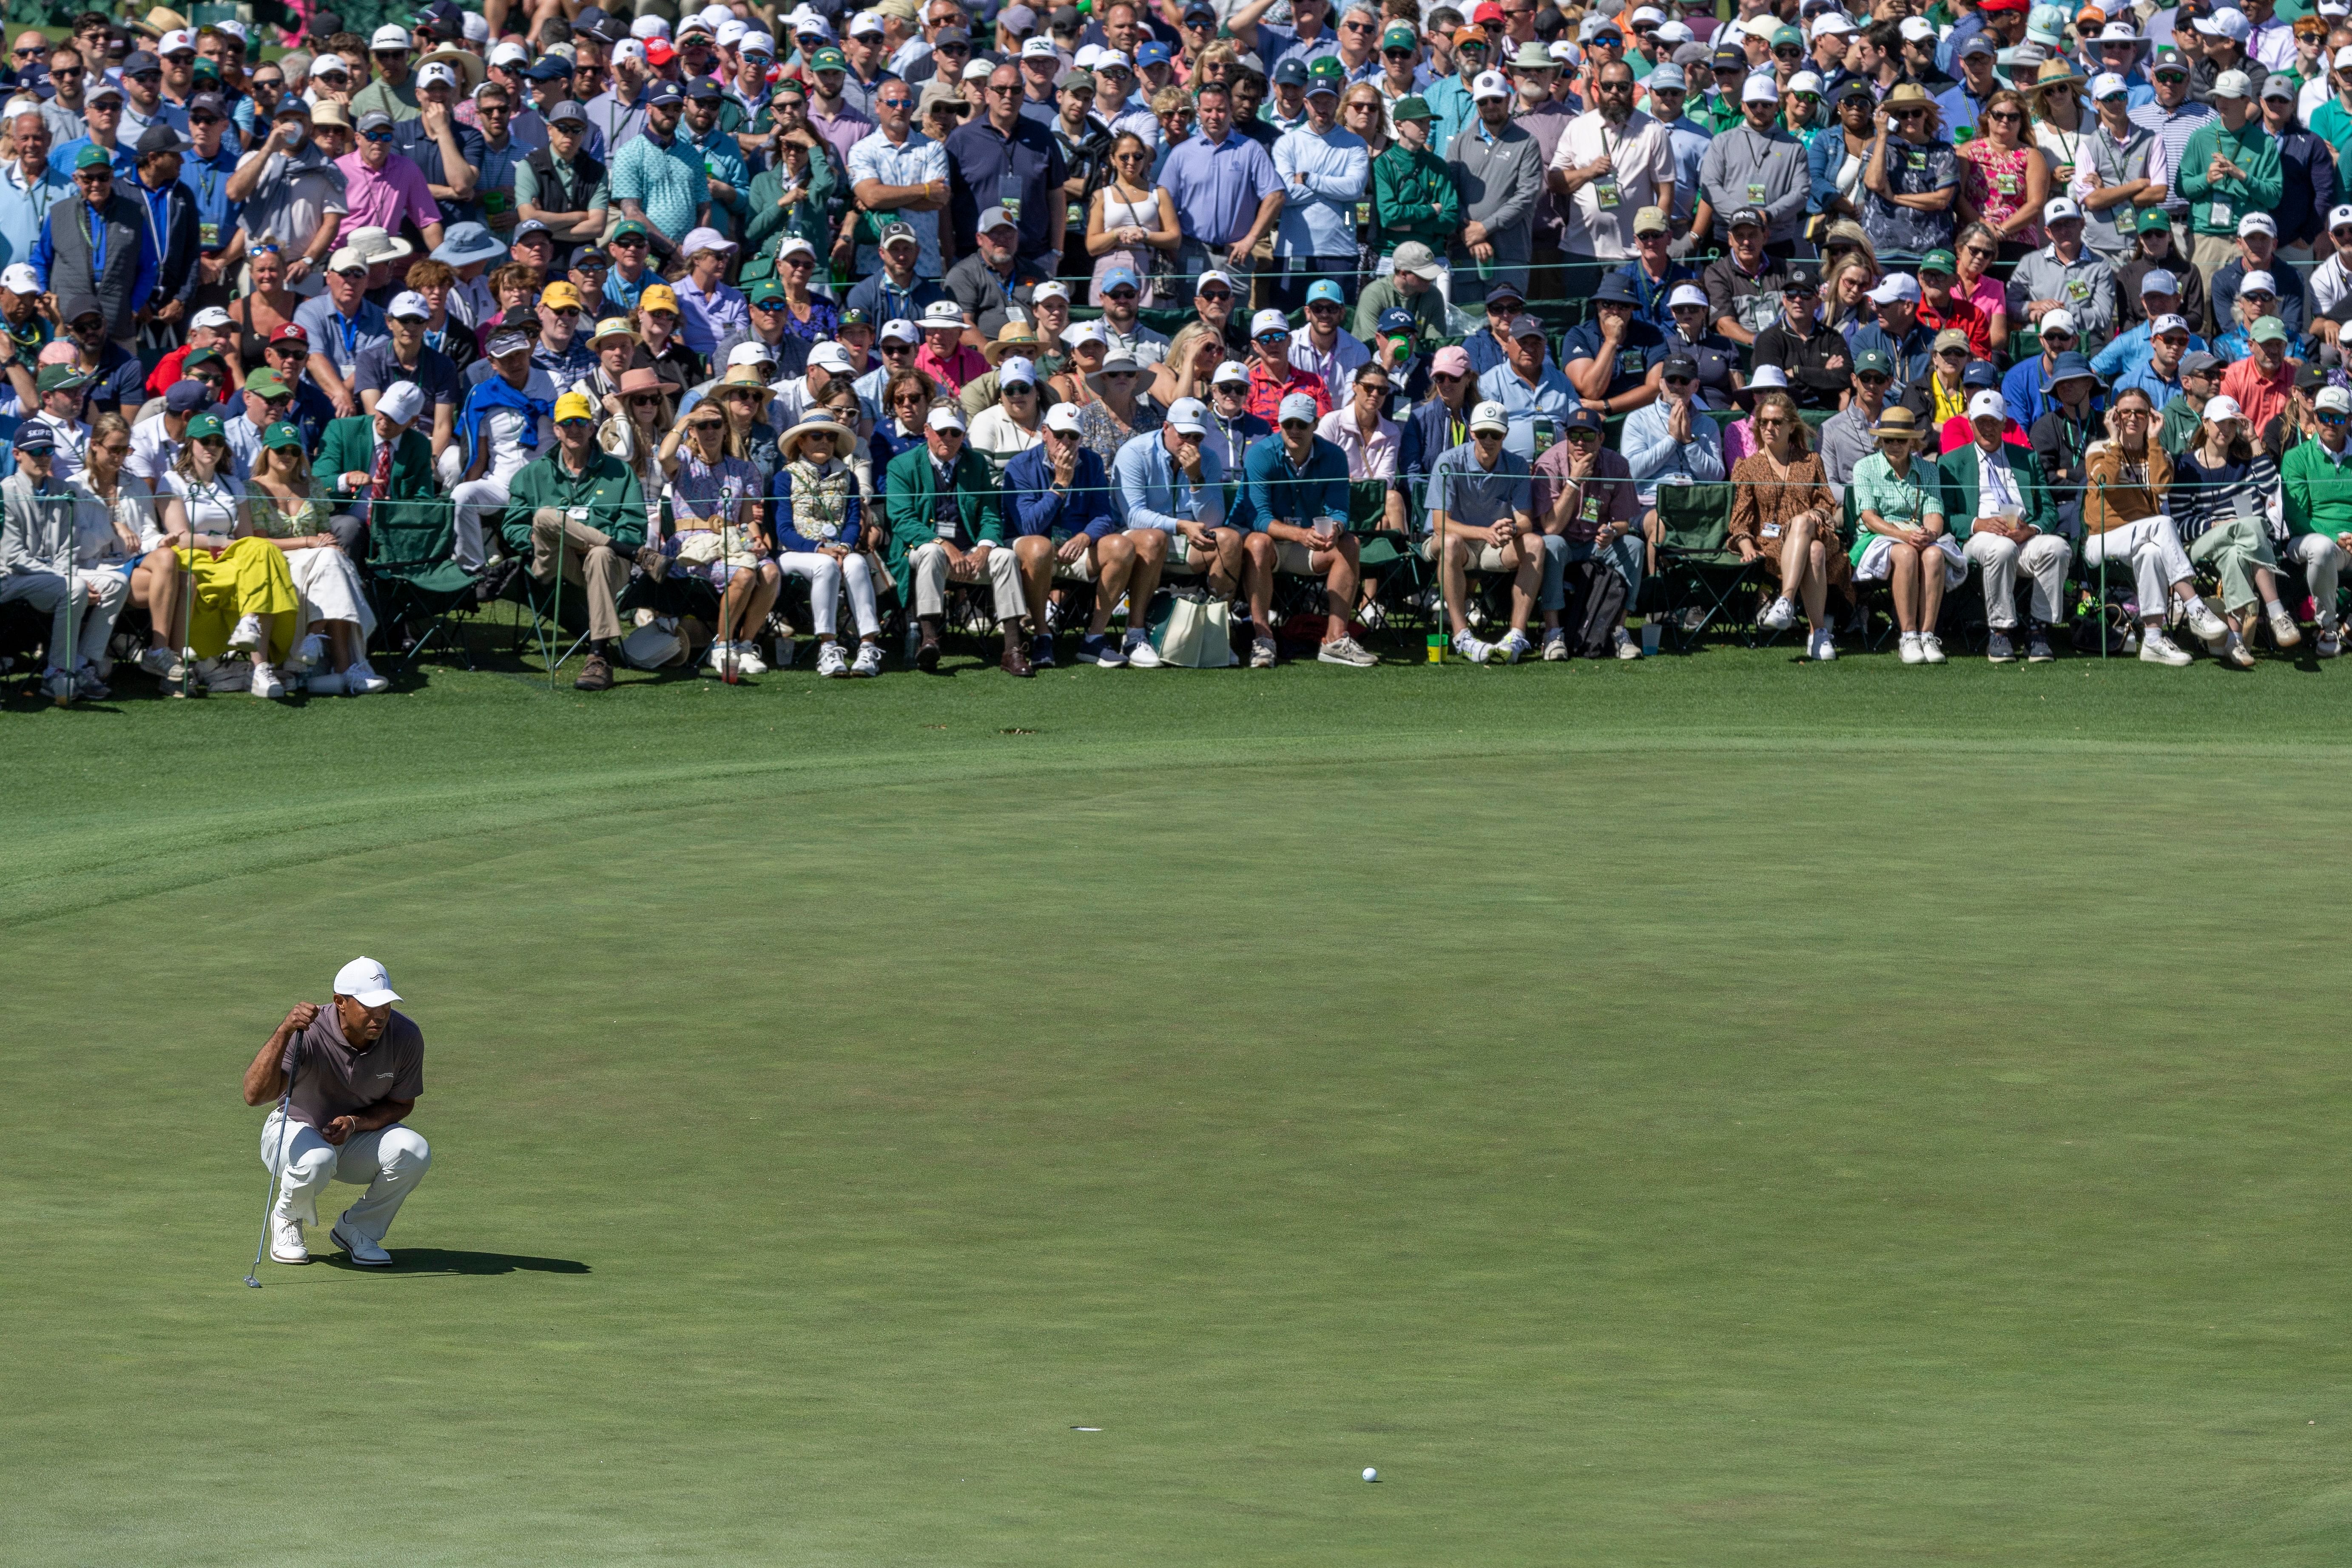 Golf fans still roaring for Tiger Woods at the Masters